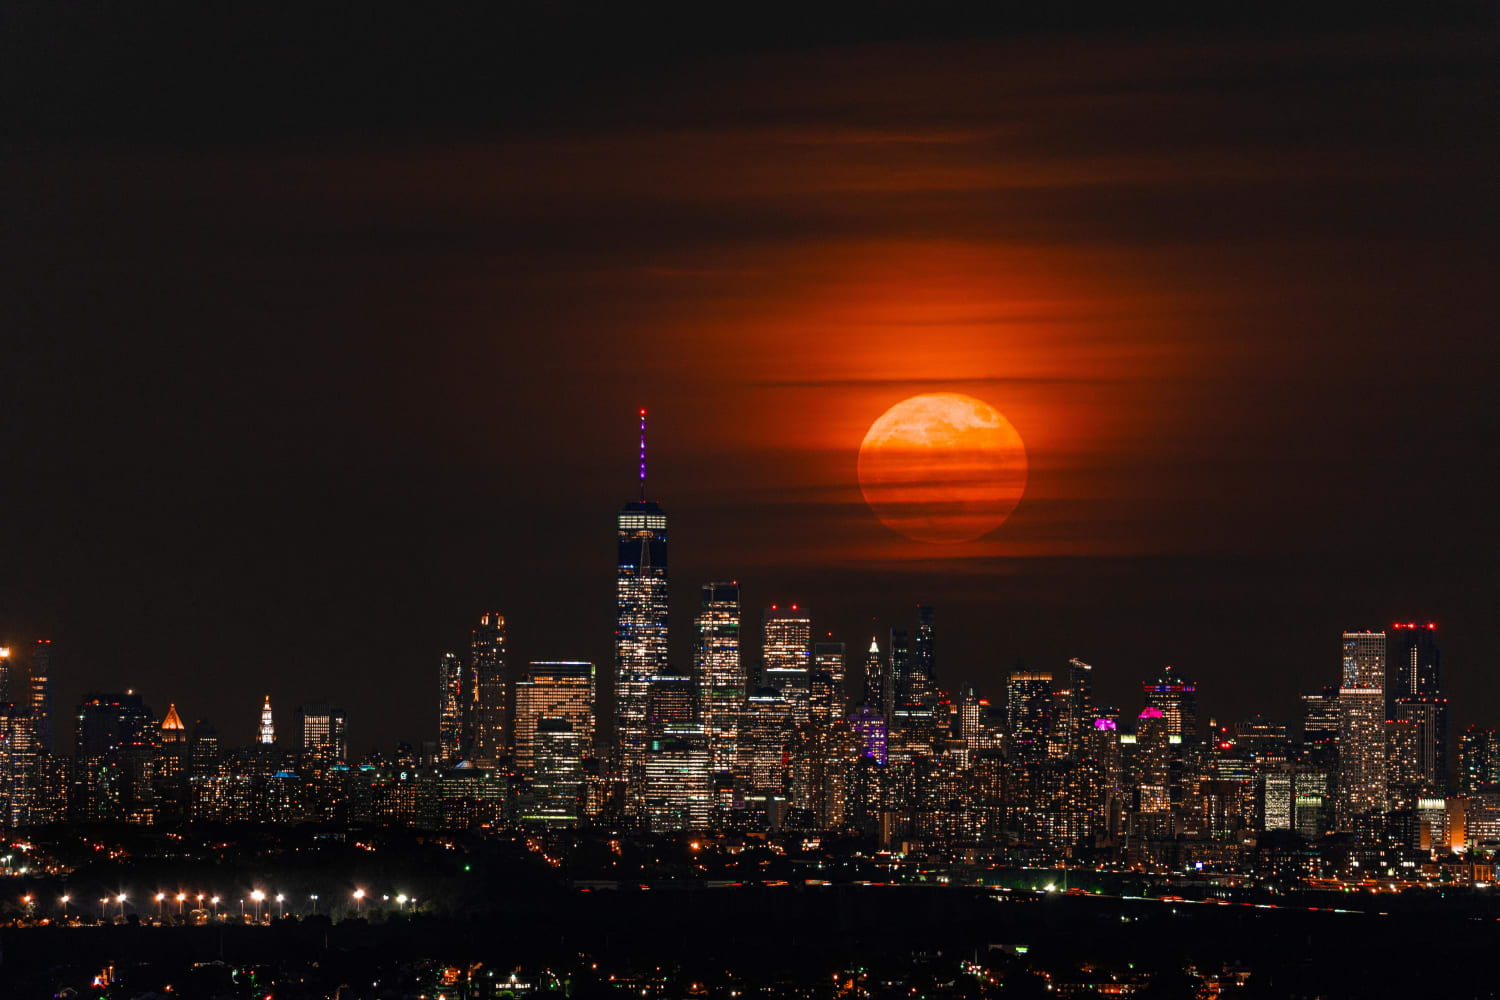 Been seeing a lot of mooning on this sub the last day, can't help but show you mine ;) This is the supermoon from last night, shot from 13.6 miles away from New York City! (credit @mikeyyy0)